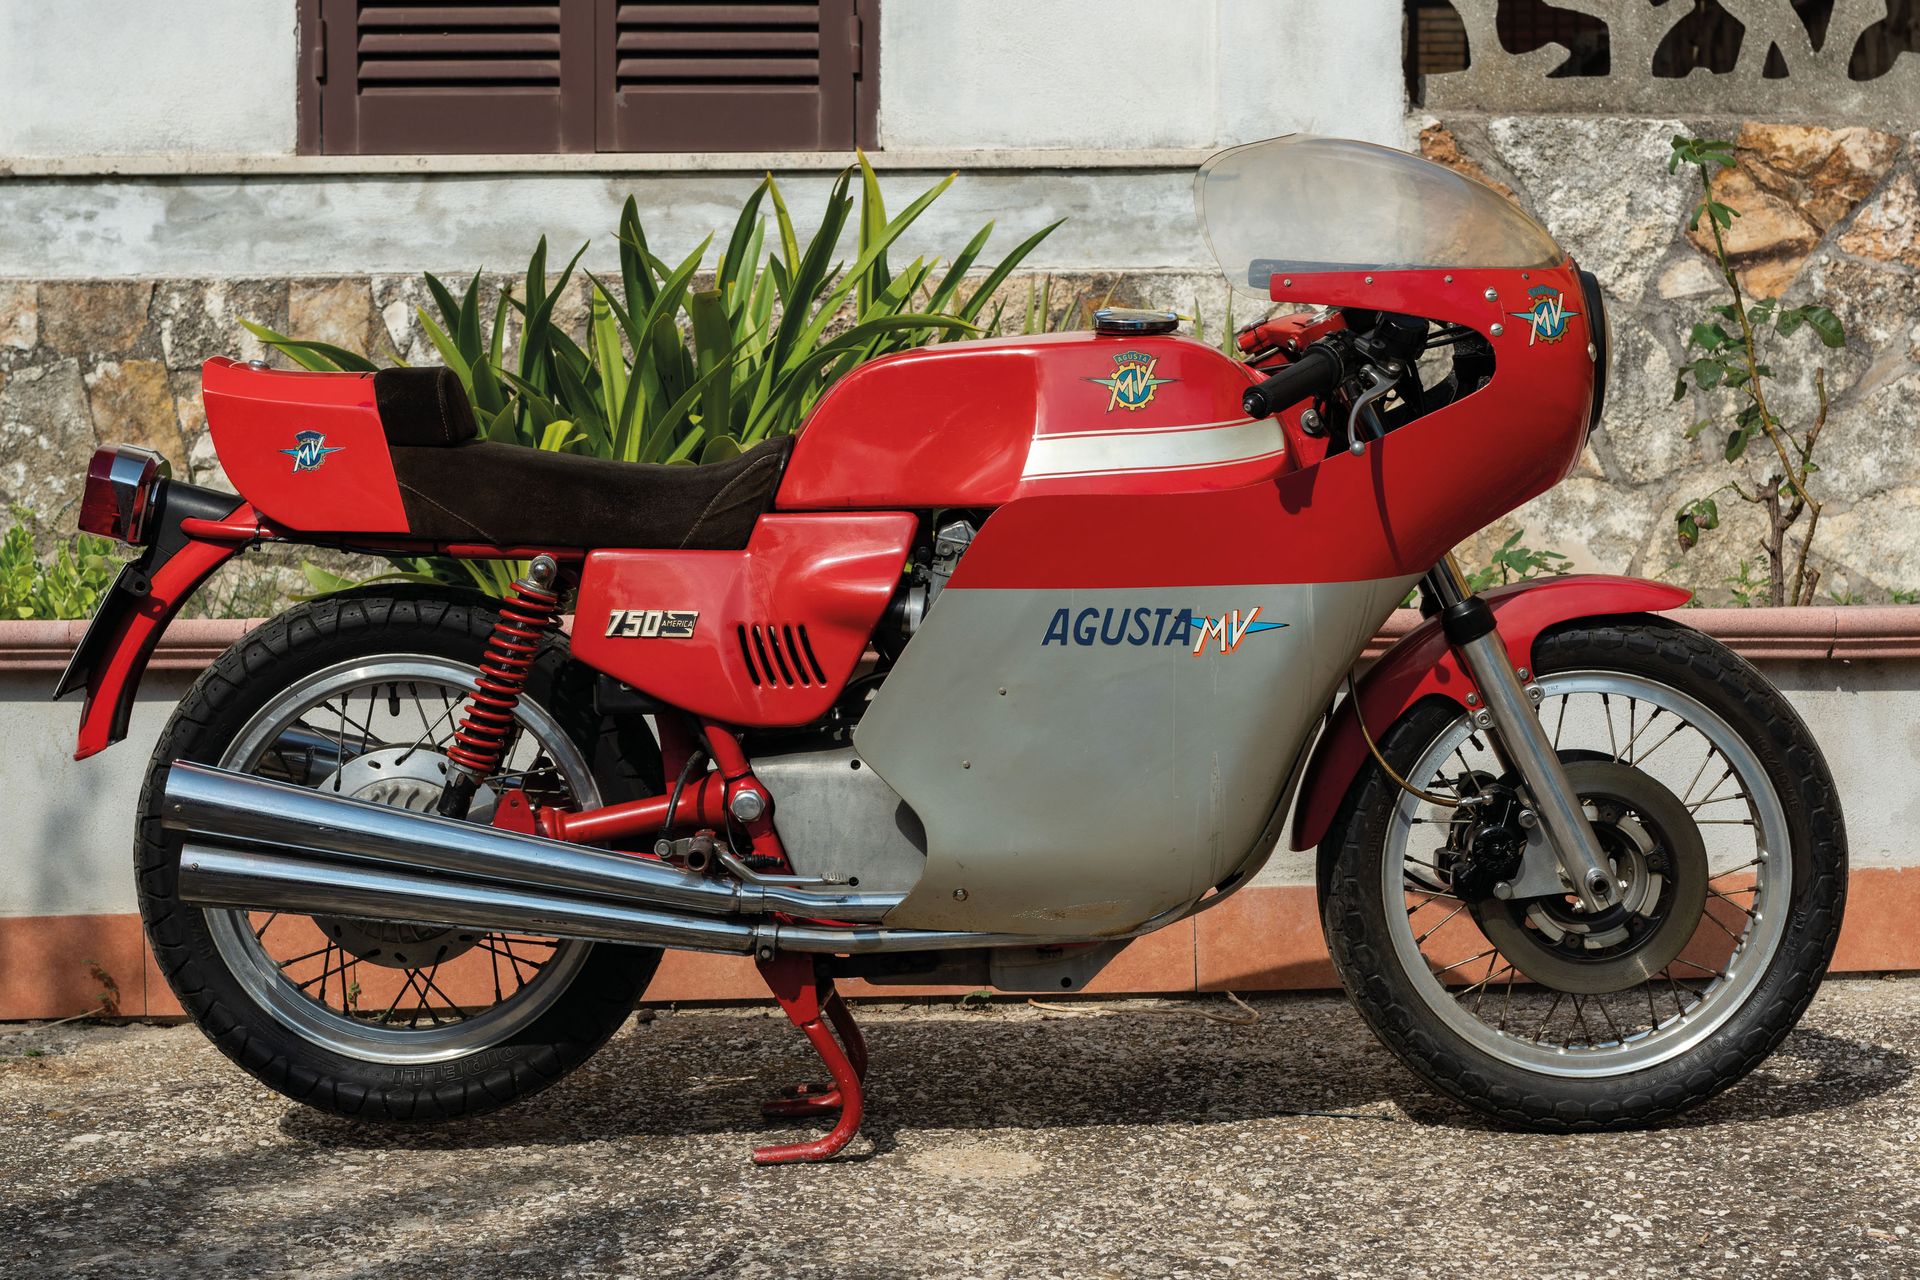 MV AGUSTA 750 S AMERICA, 1976 
Chassis/Chassis n. MV750 2210497

- One of only 2&hellip;